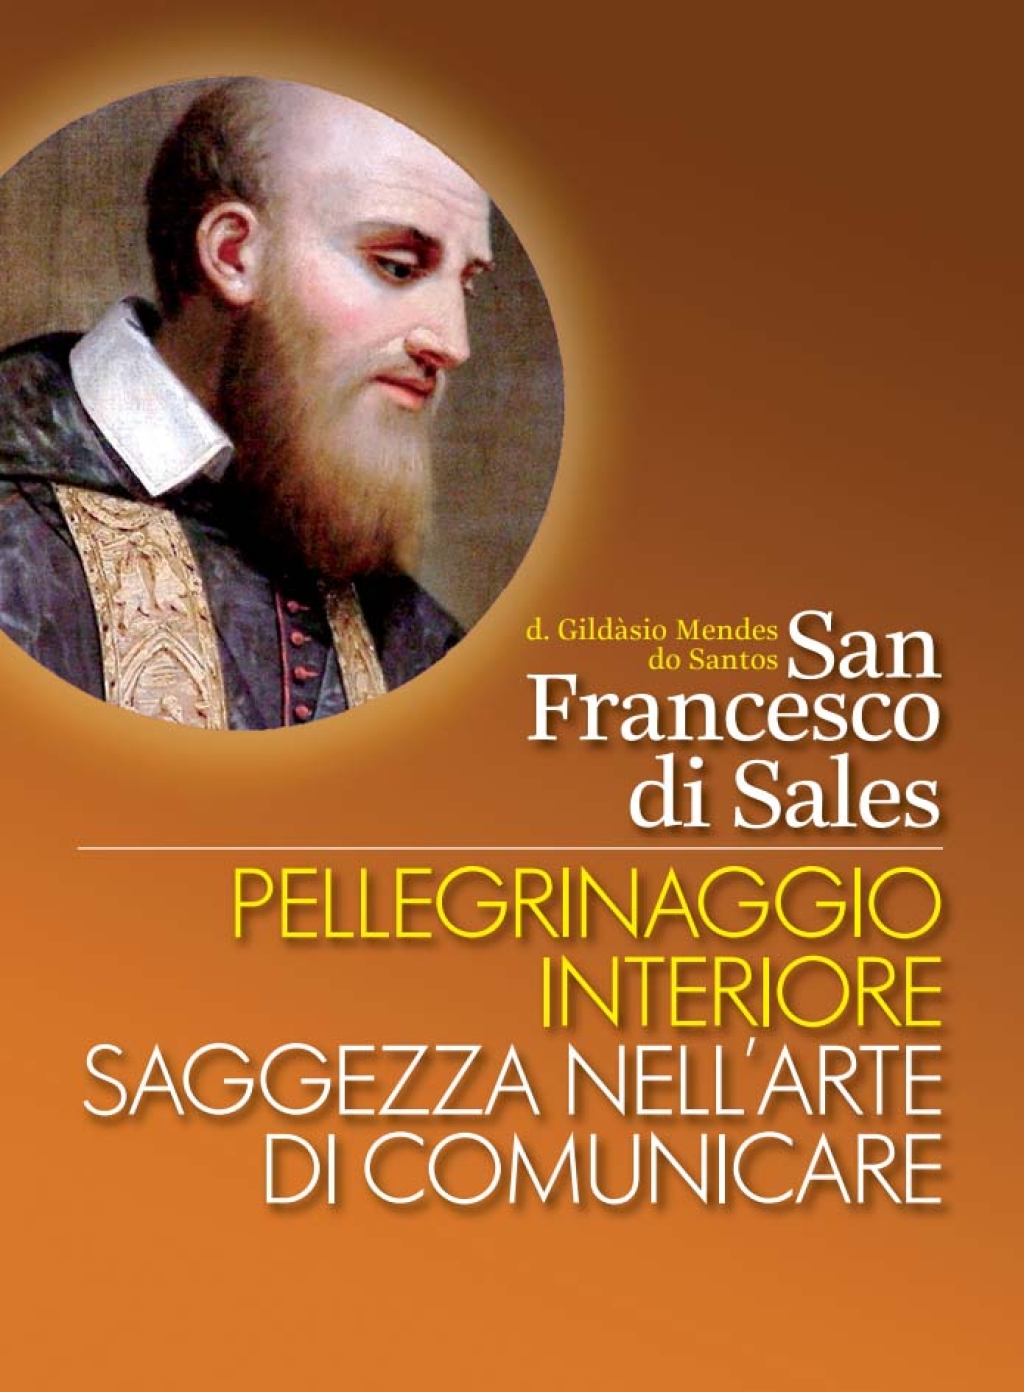 Happiness or Holiness? — Oblates of St. Francis de Sales